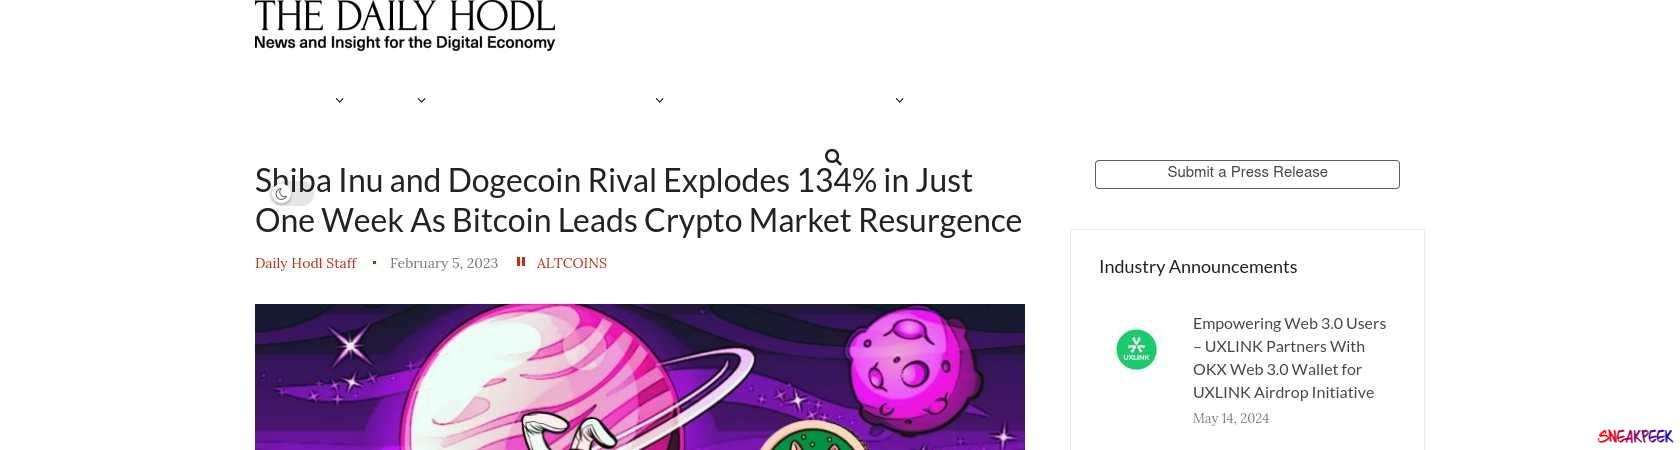 Read the full Article:  ⭲ Shiba Inu and Dogecoin Rival Explodes 134% in Just One Week As Bitcoin Leads Crypto Market Resurgence